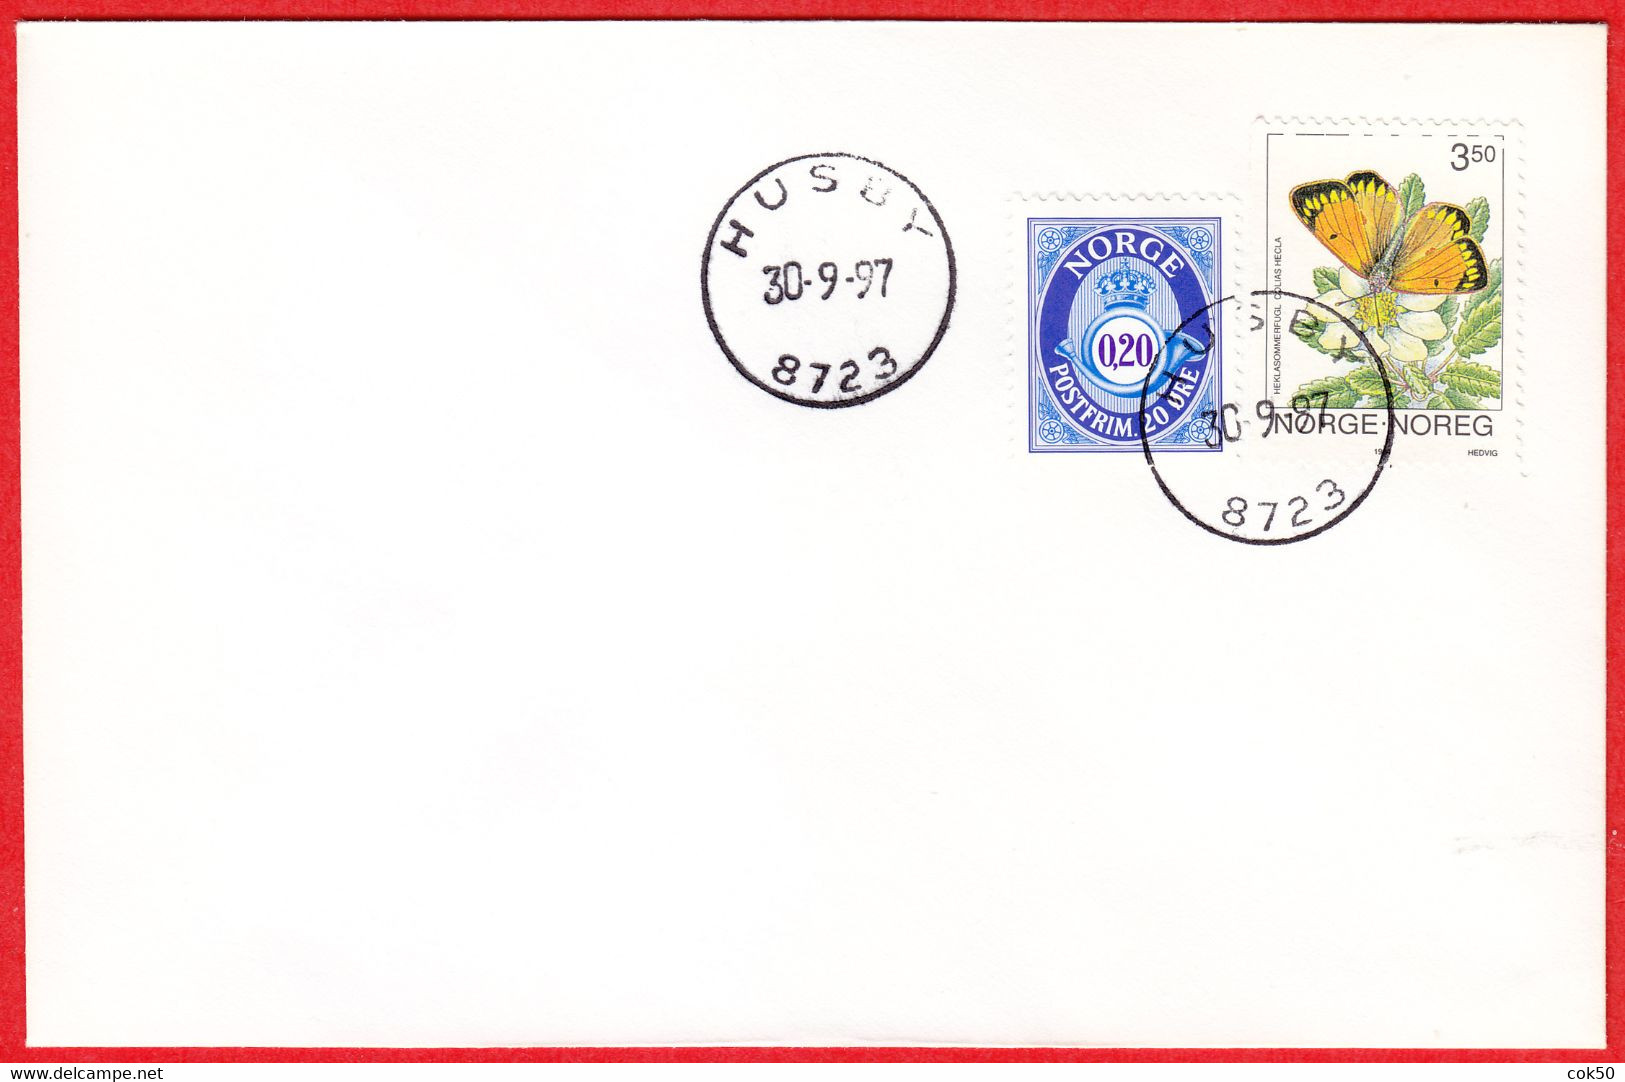 NORWAY -  8723 HUSBY - (Nordland County) - Last Day/postoffice Closed On 1997.09.30 - Lokale Uitgaven